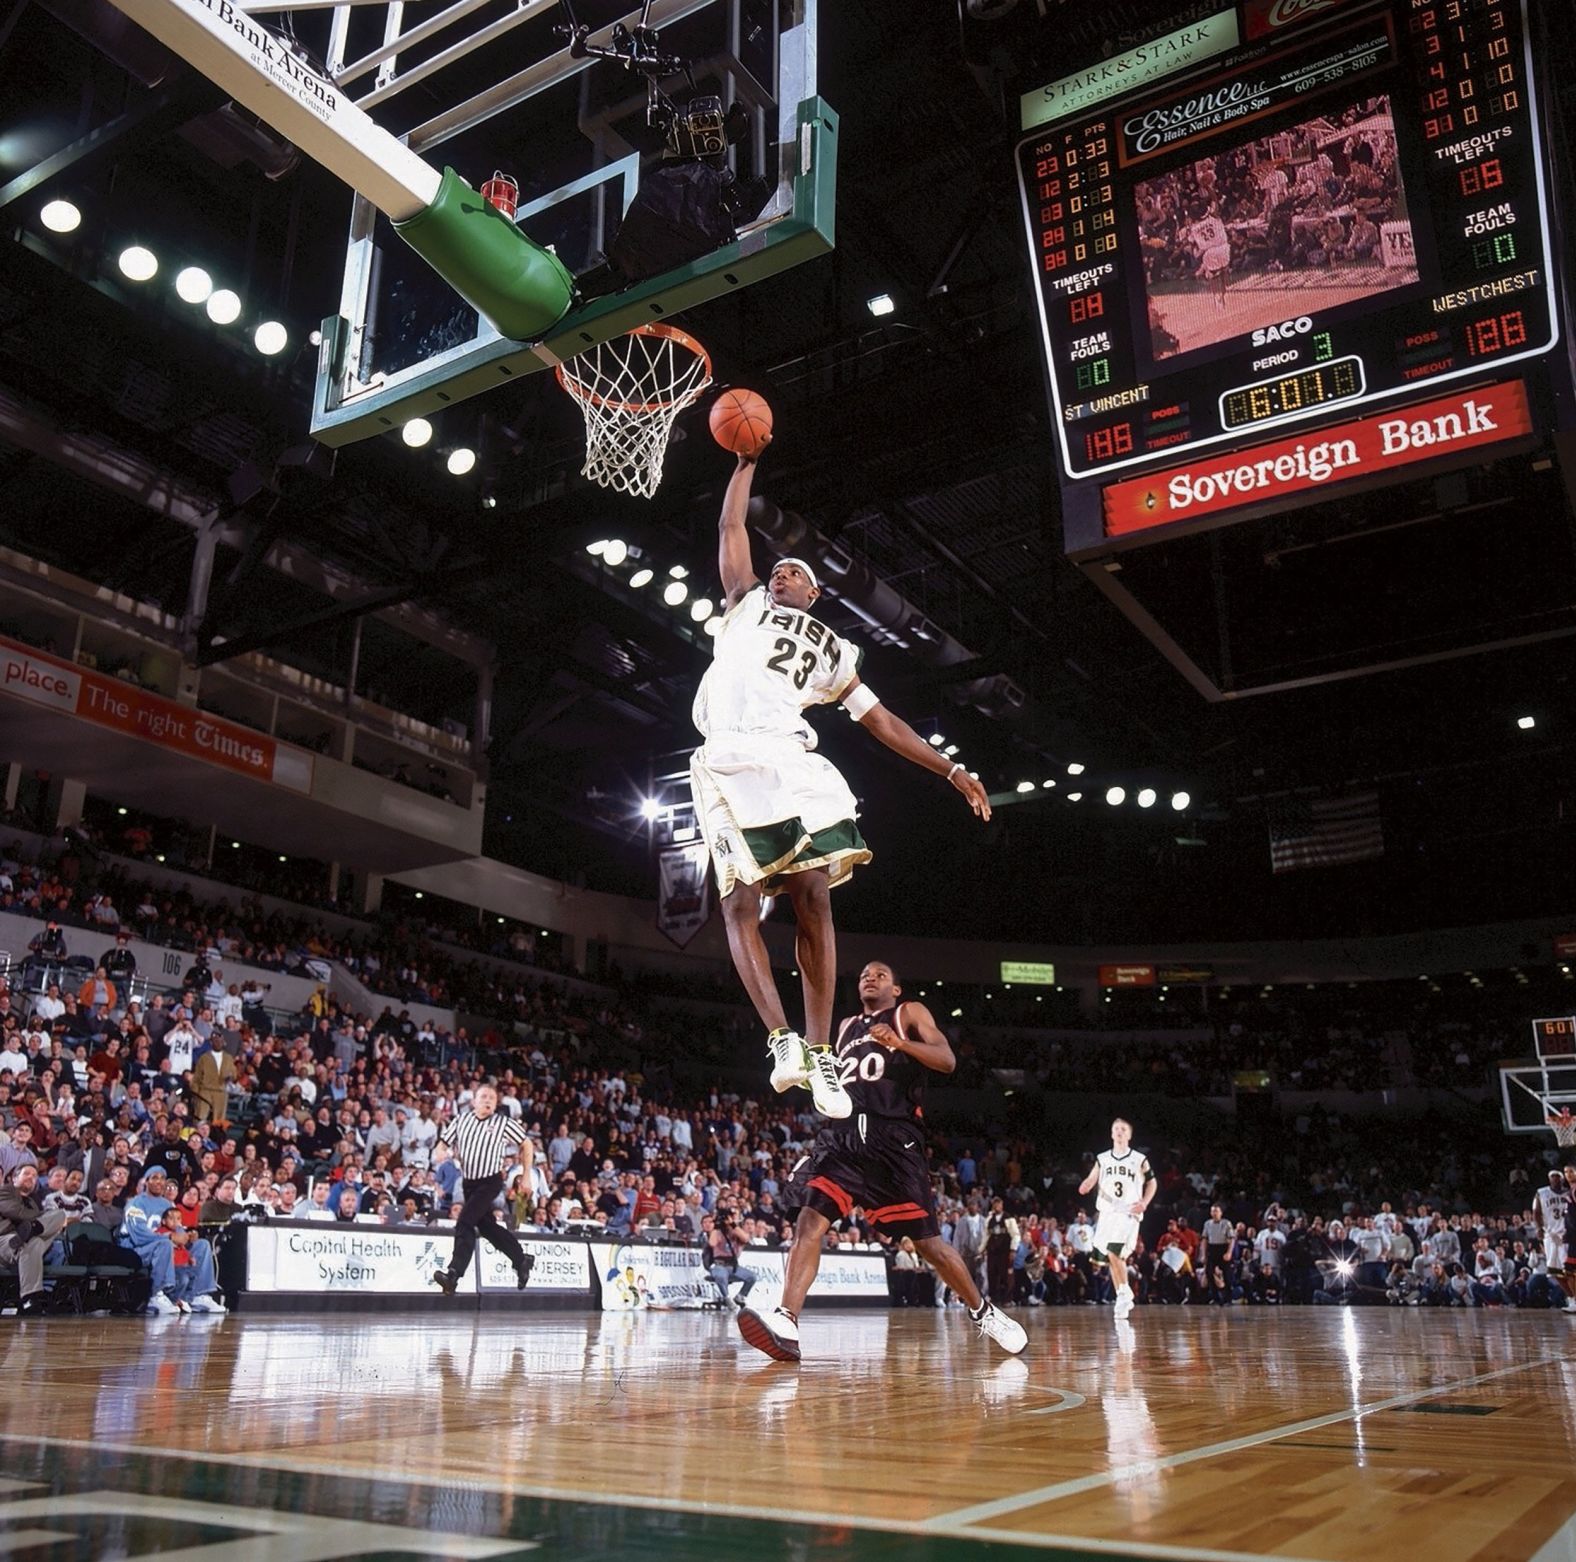 James throws down a dunk during a game in Trenton, New Jersey, in February 2003. James was just a junior in high school when he appeared on the cover of Sports Illustrated as "The Chosen One." He was such a star that ESPN aired some of his high school games.